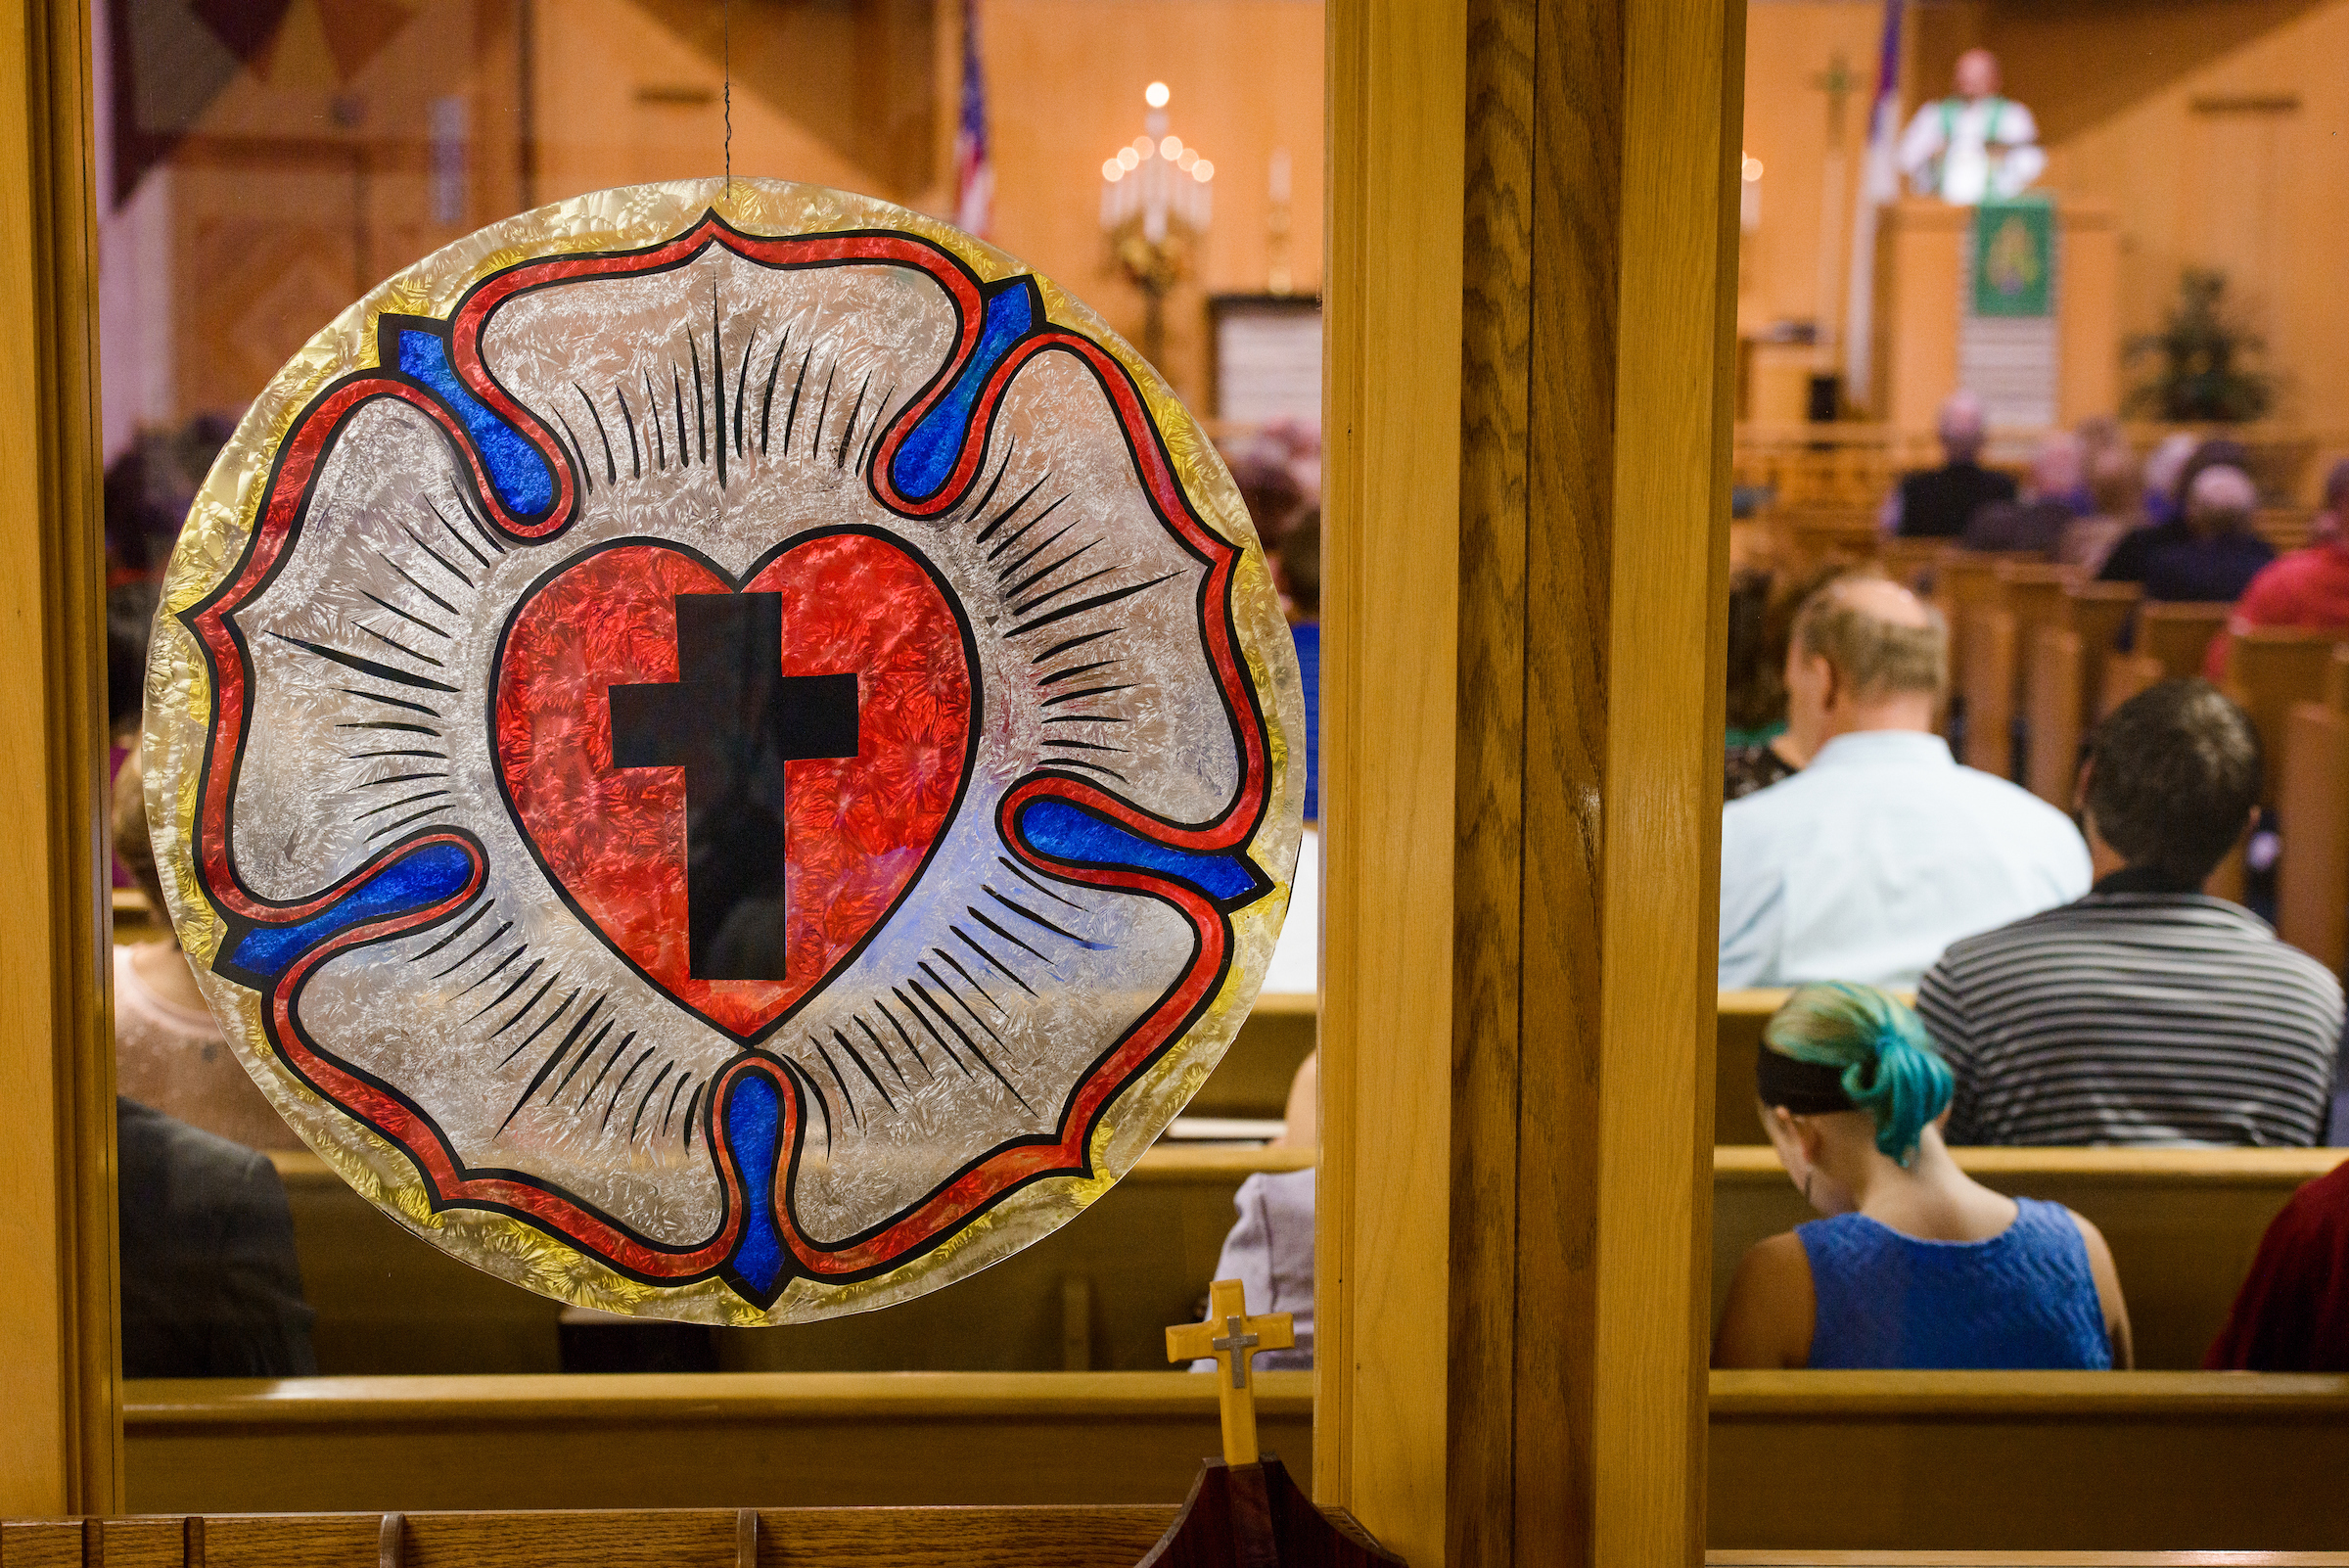 The Luther Rose hanging on the window in the narthex as the Rev. Dr. Heath Trampe preaches on Sunday, Sept. 24, 2017, at Faith Lutheran Church, York, Neb. LCMS Communications/Erik M. Lunsford